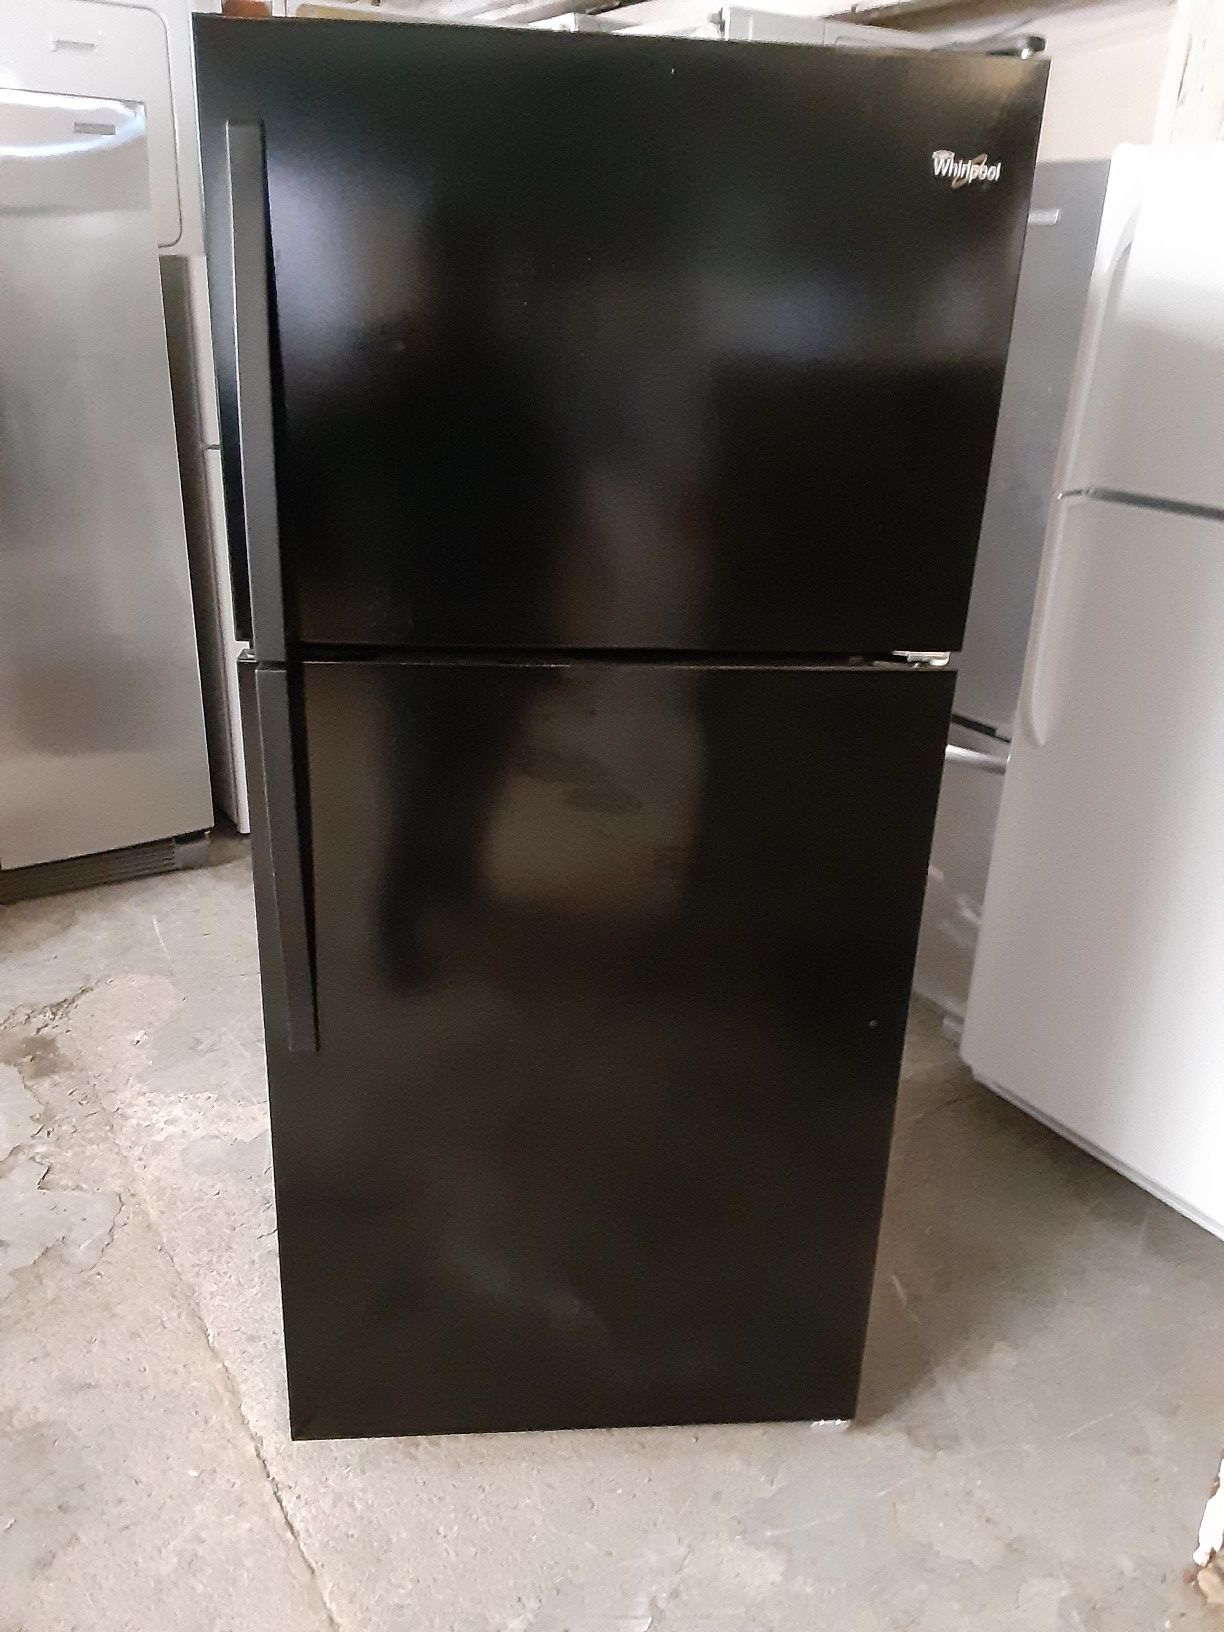 Refrigerator whirlpool good condition 3 months warranty delivery and install